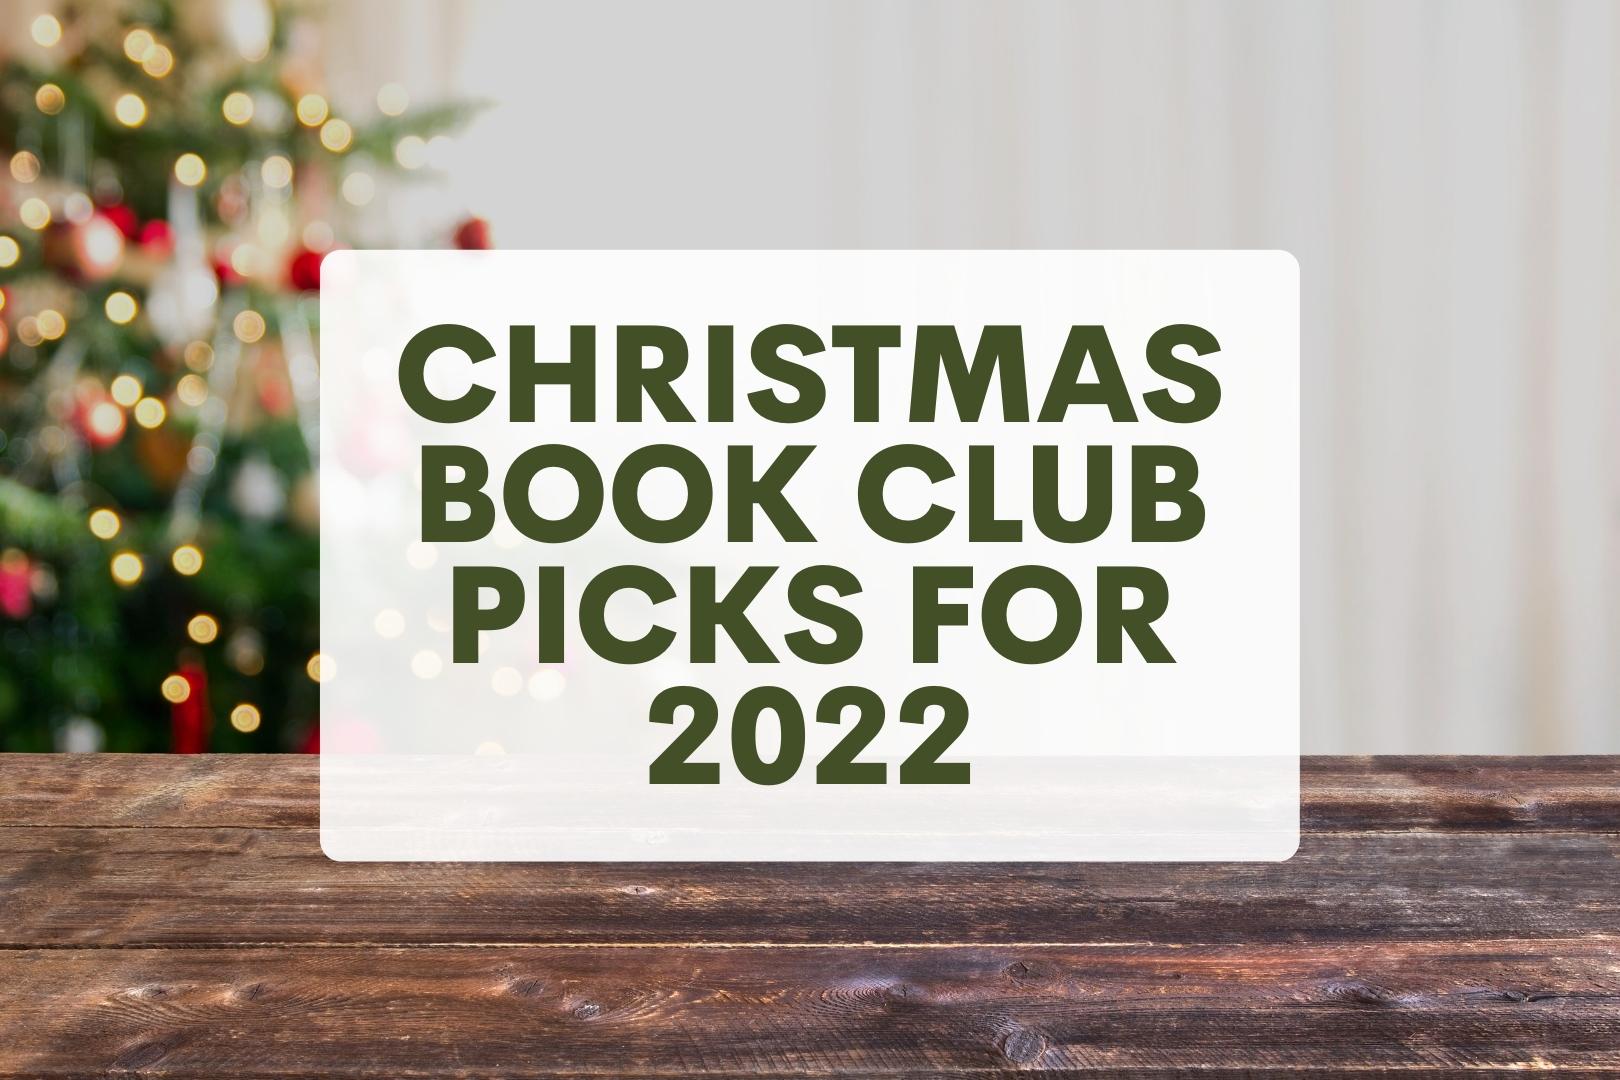 7 Christmas Books for Your Book Club in 2022